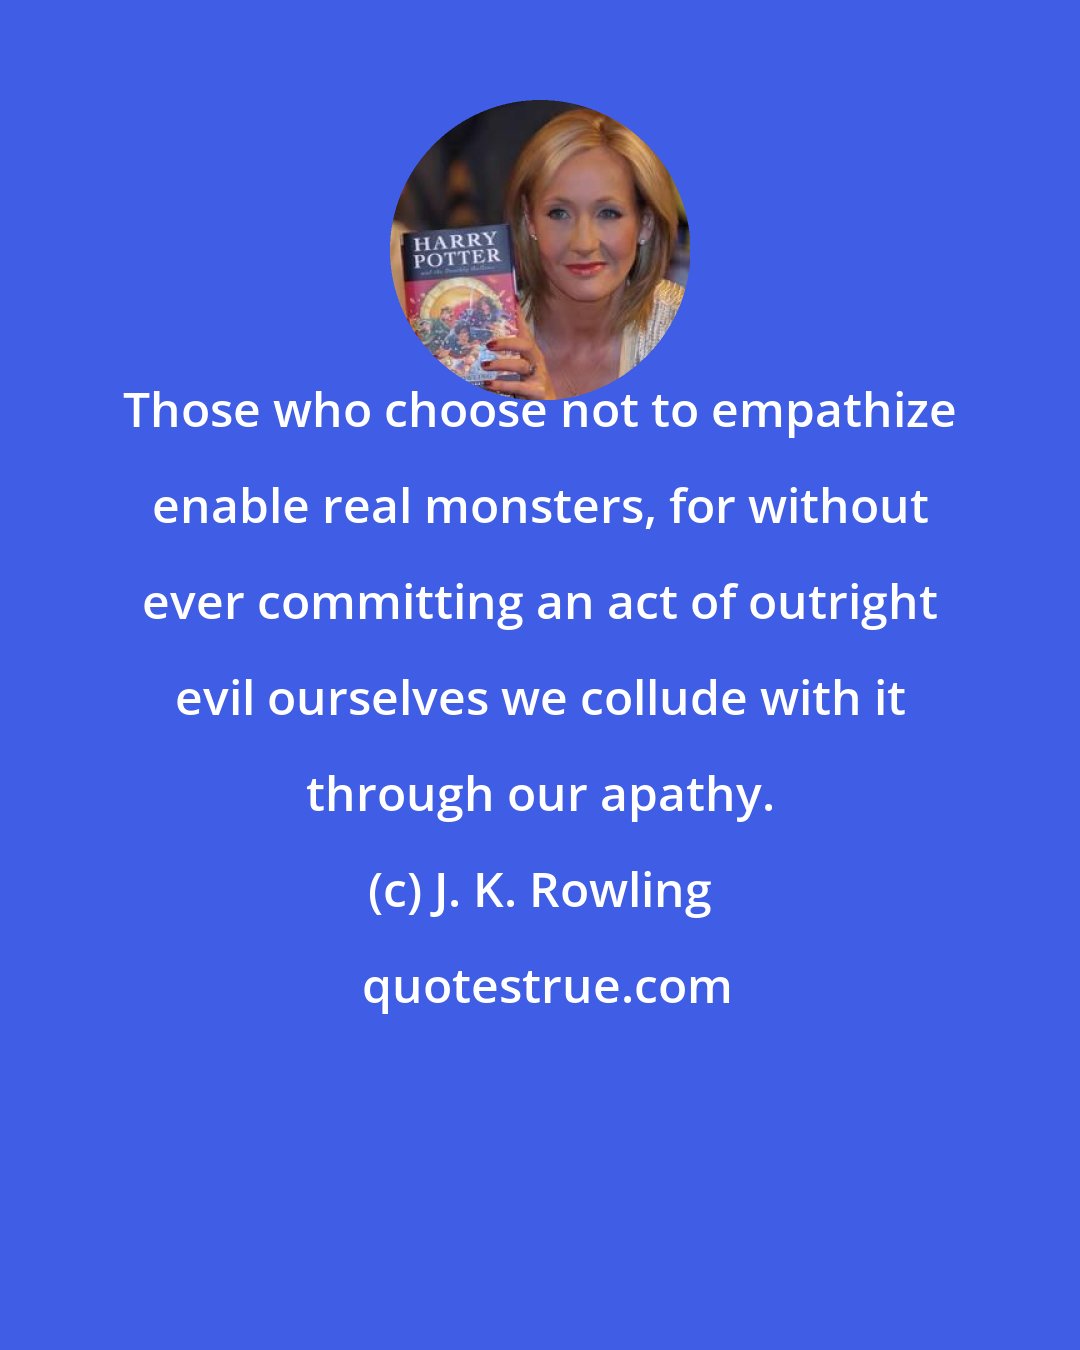 J. K. Rowling: Those who choose not to empathize enable real monsters, for without ever committing an act of outright evil ourselves we collude with it through our apathy.